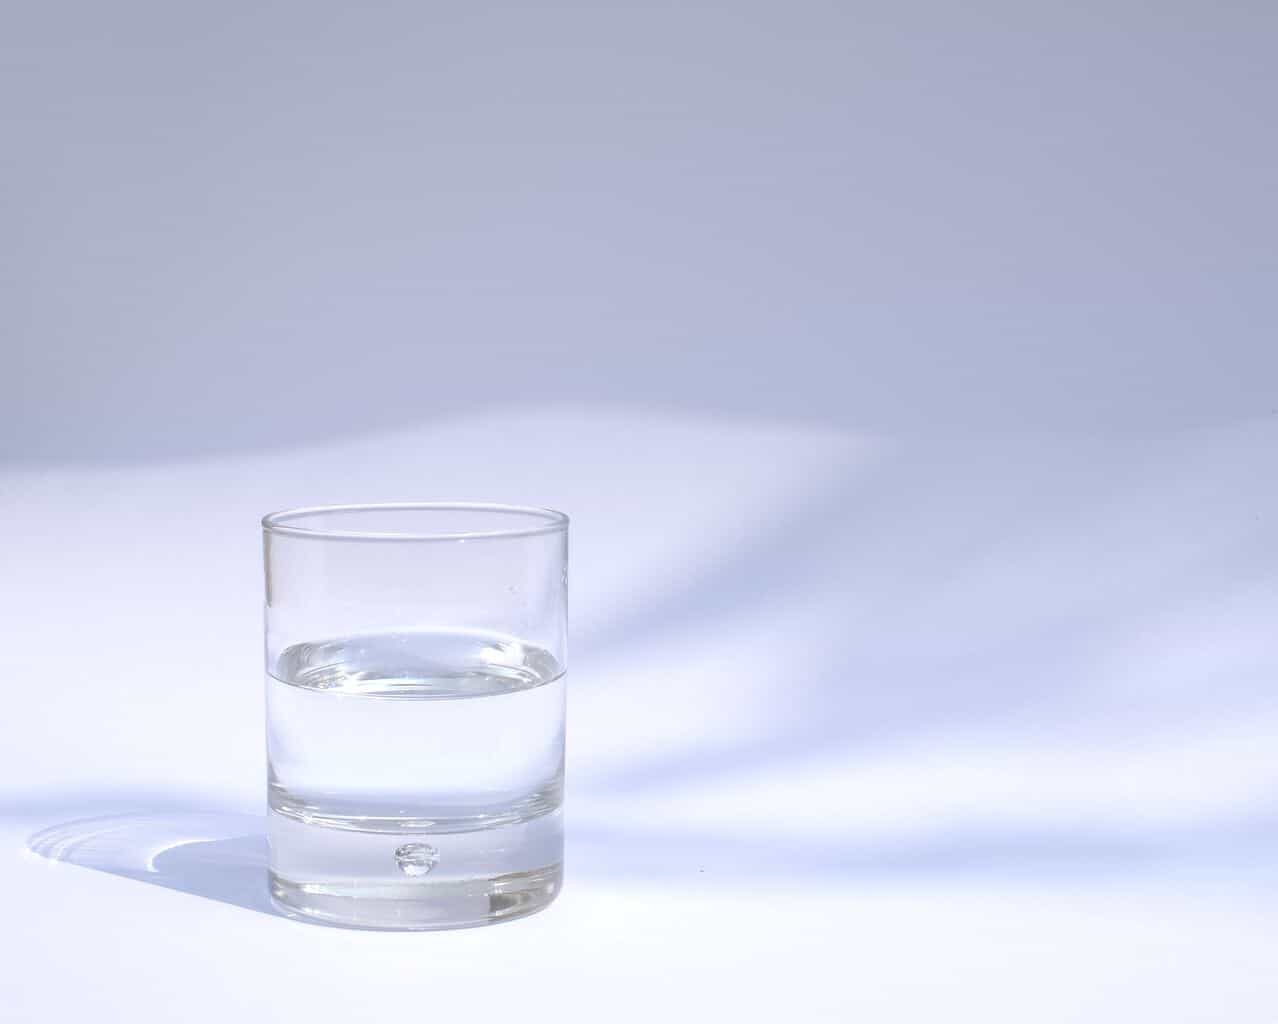 glass filled with water